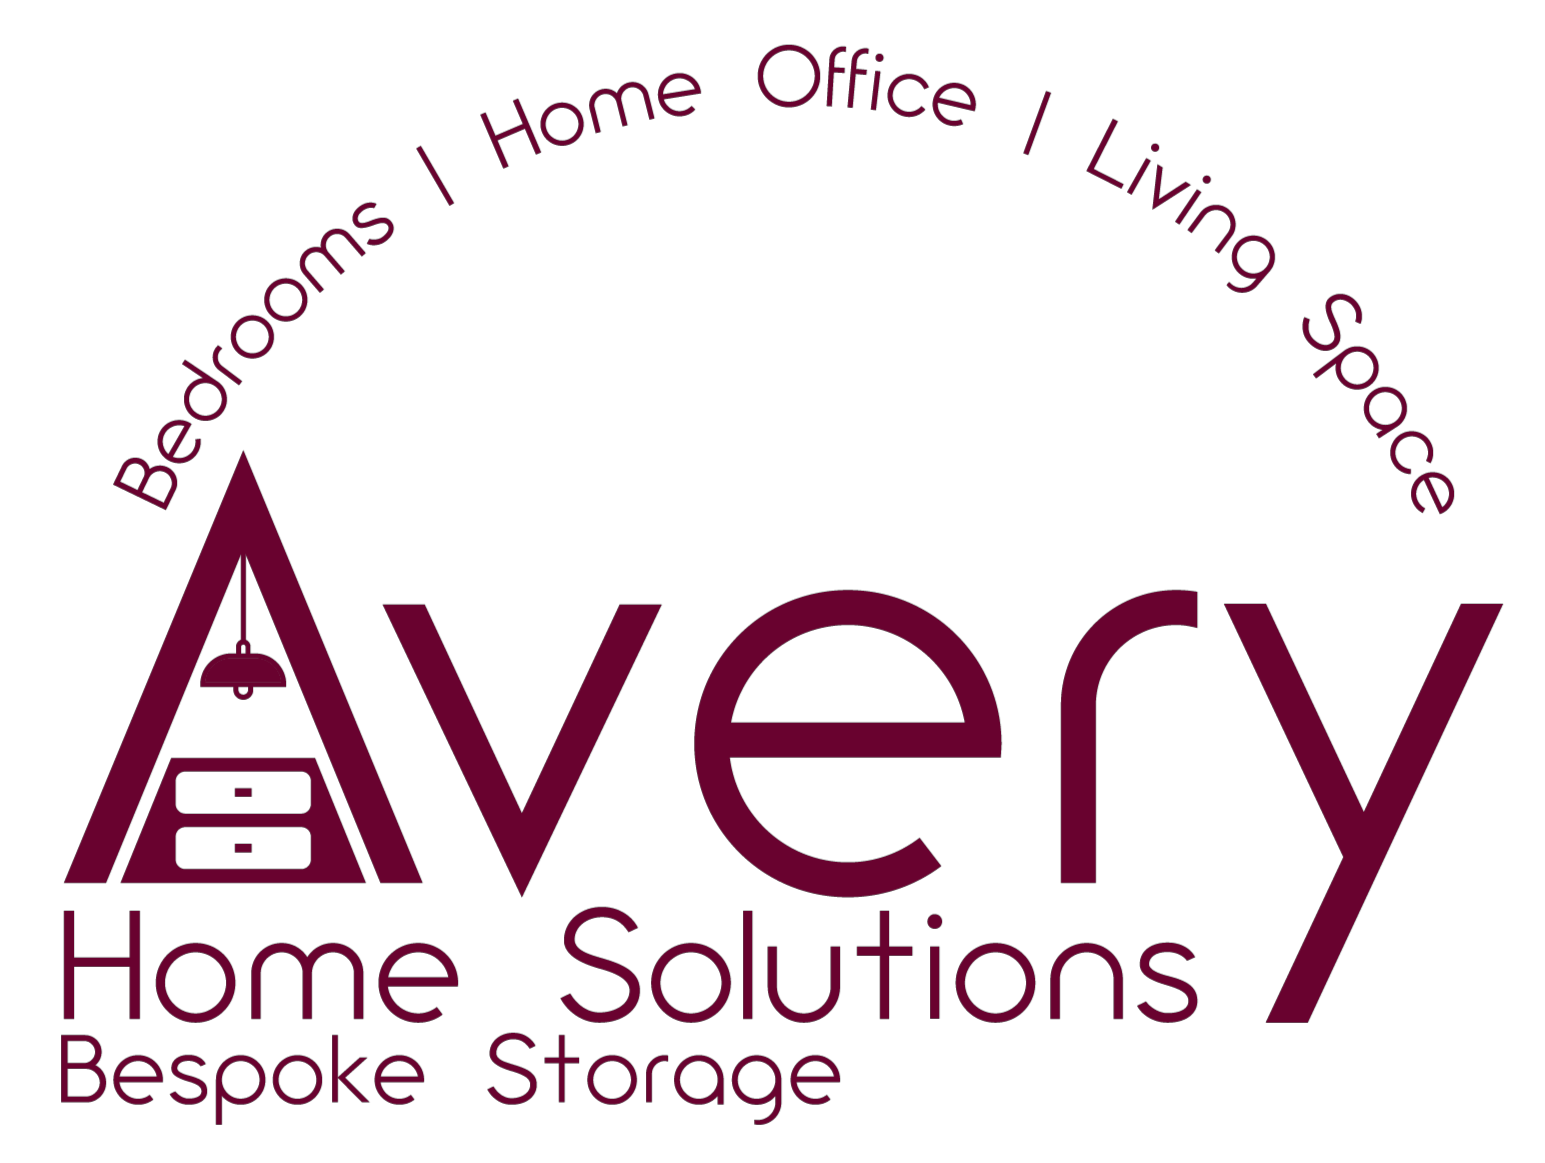 Avery Home Solutions